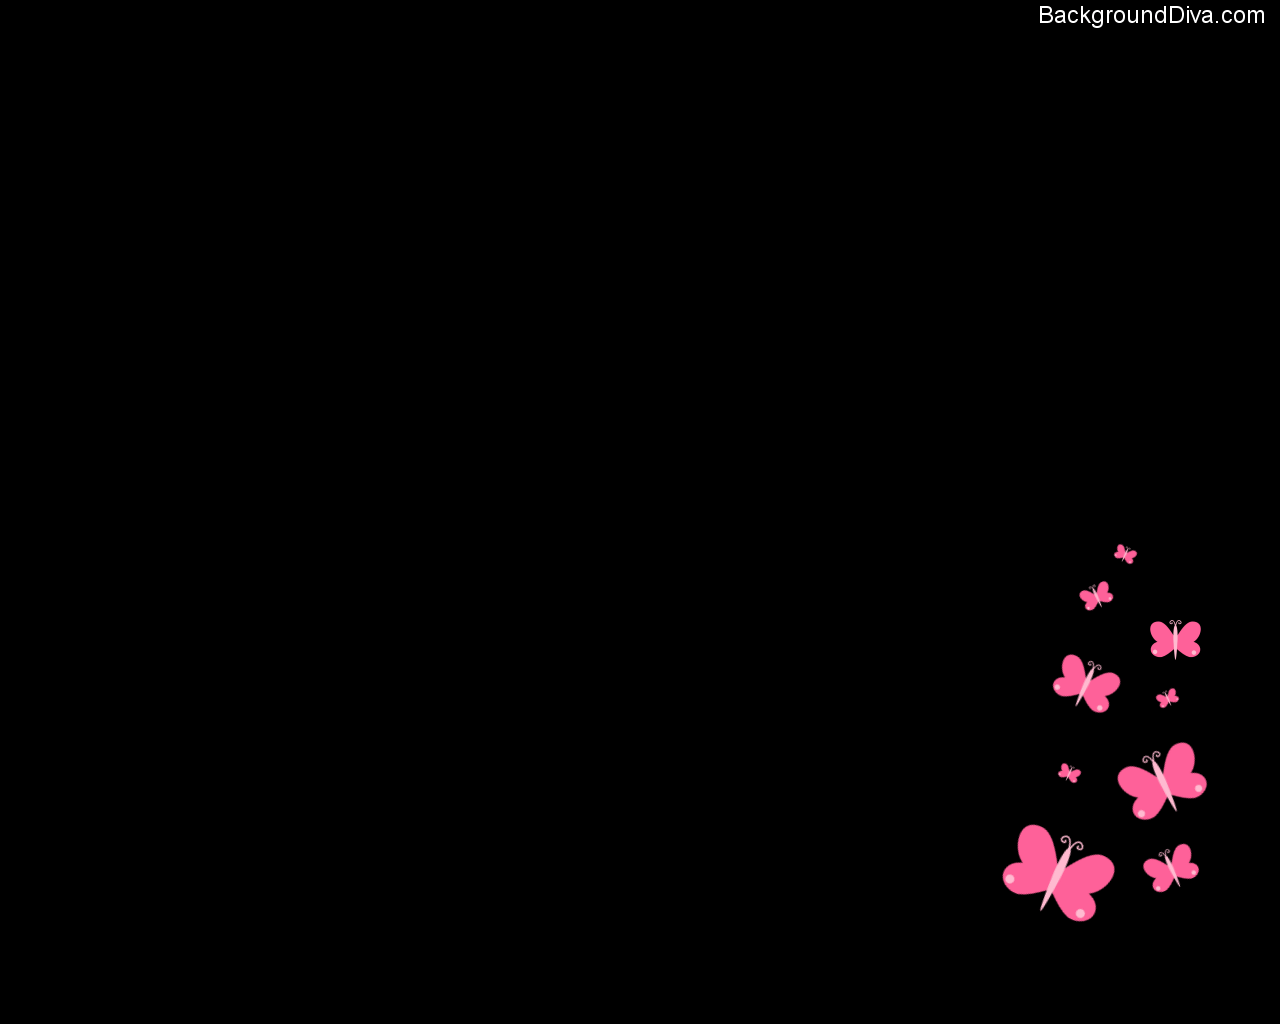 Pink And Black Wallpaper Full HD Pics Background Butterfly For Pc